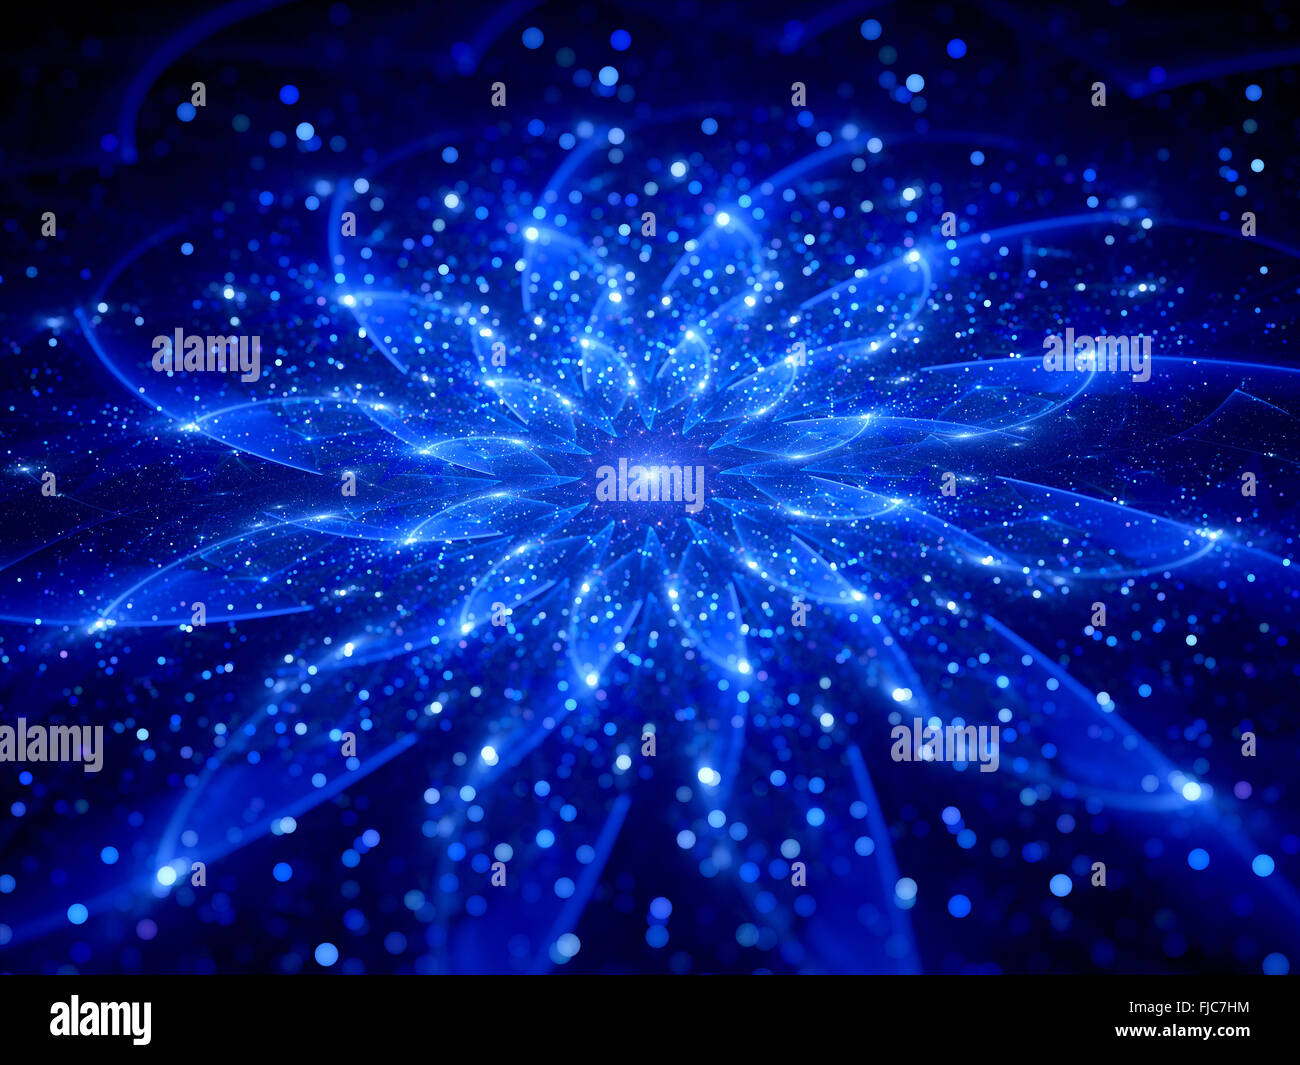 Blue glowing flower in space, computer generated abstract background Stock Photo